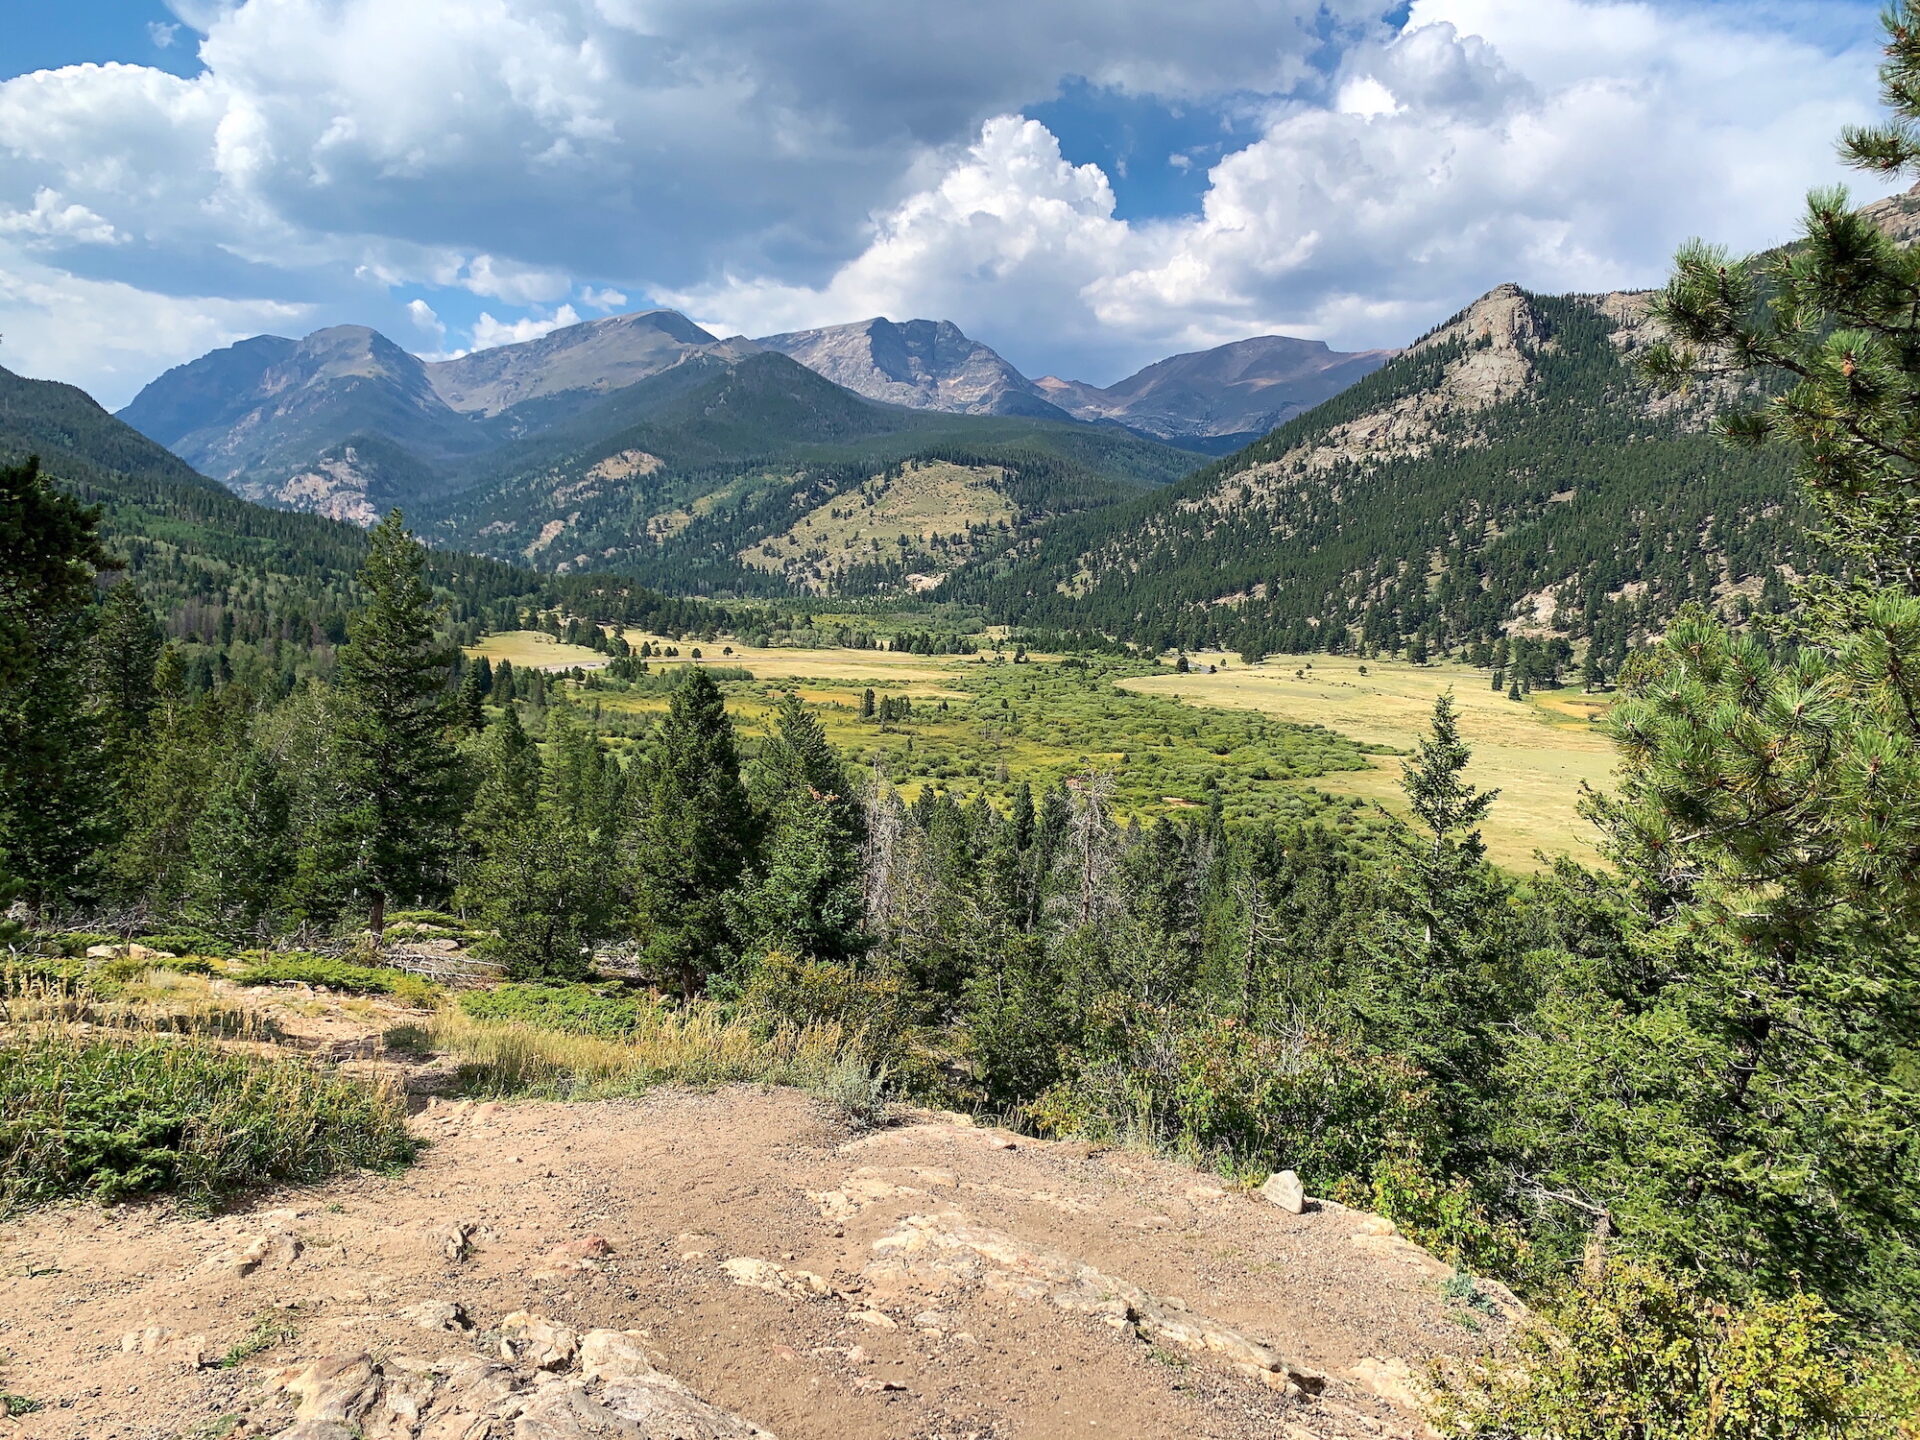 Colorado 5 Day Itinerary: 3 Great Options